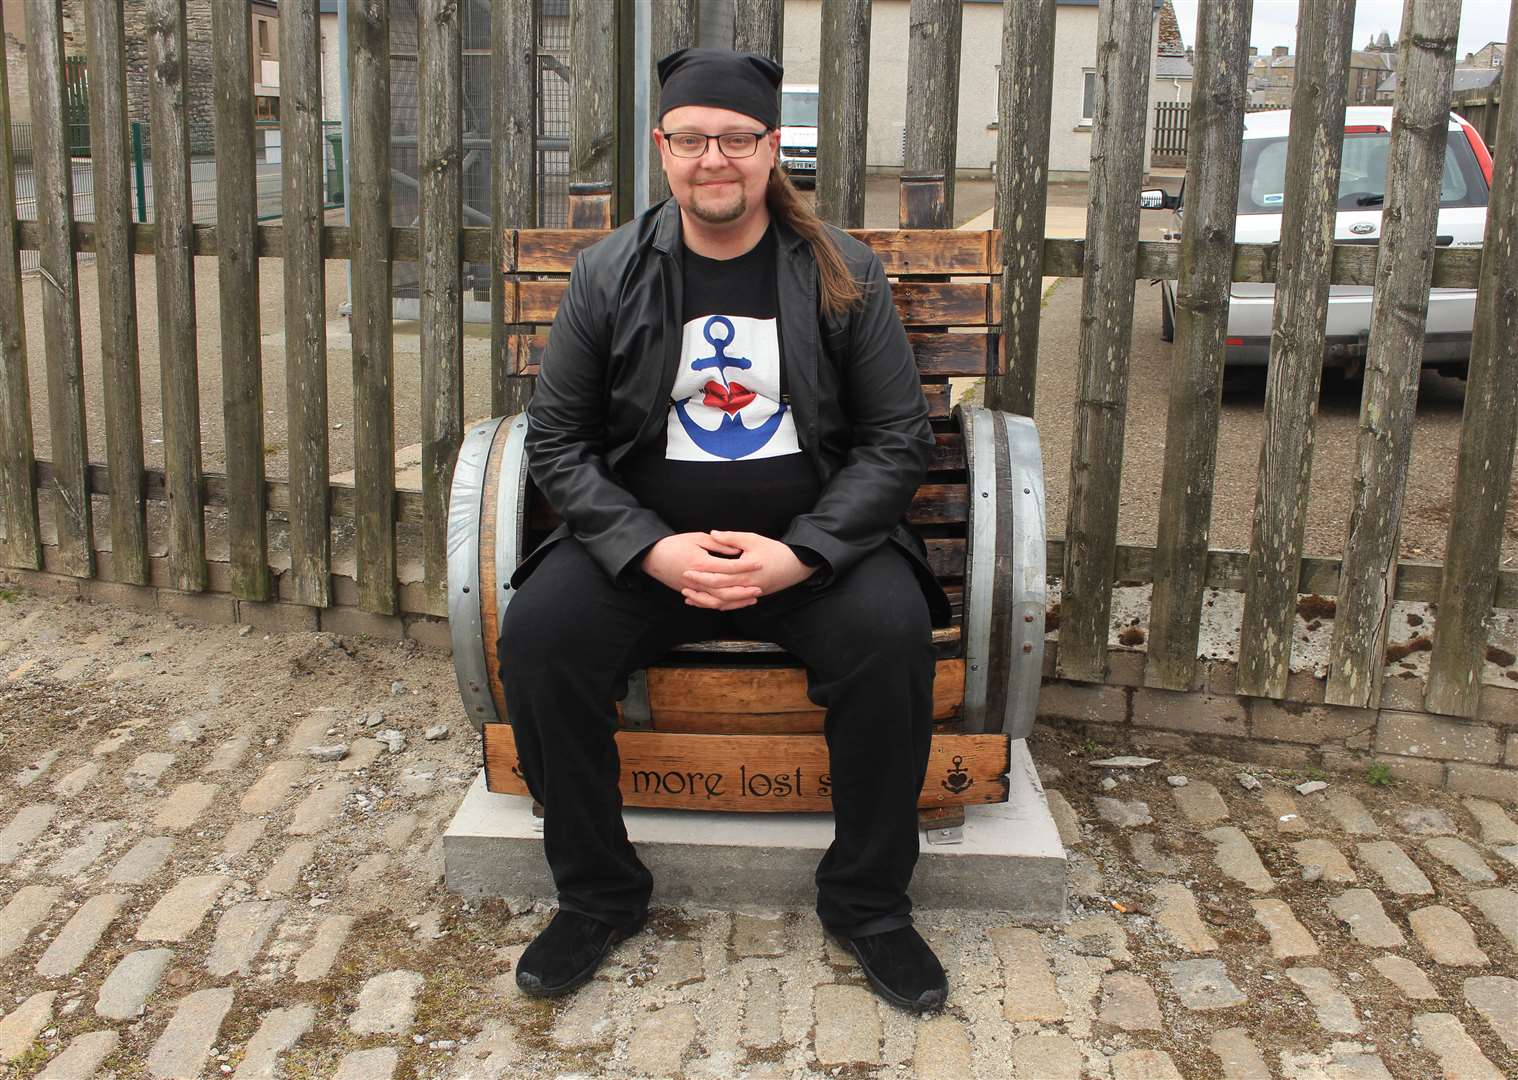 Steven Szyfelbain, who founded No More Lost Souls last summer, sitting on the group's newly installed memorial bench after the dedication ceremony on Saturday. Picture: Alan Hendry